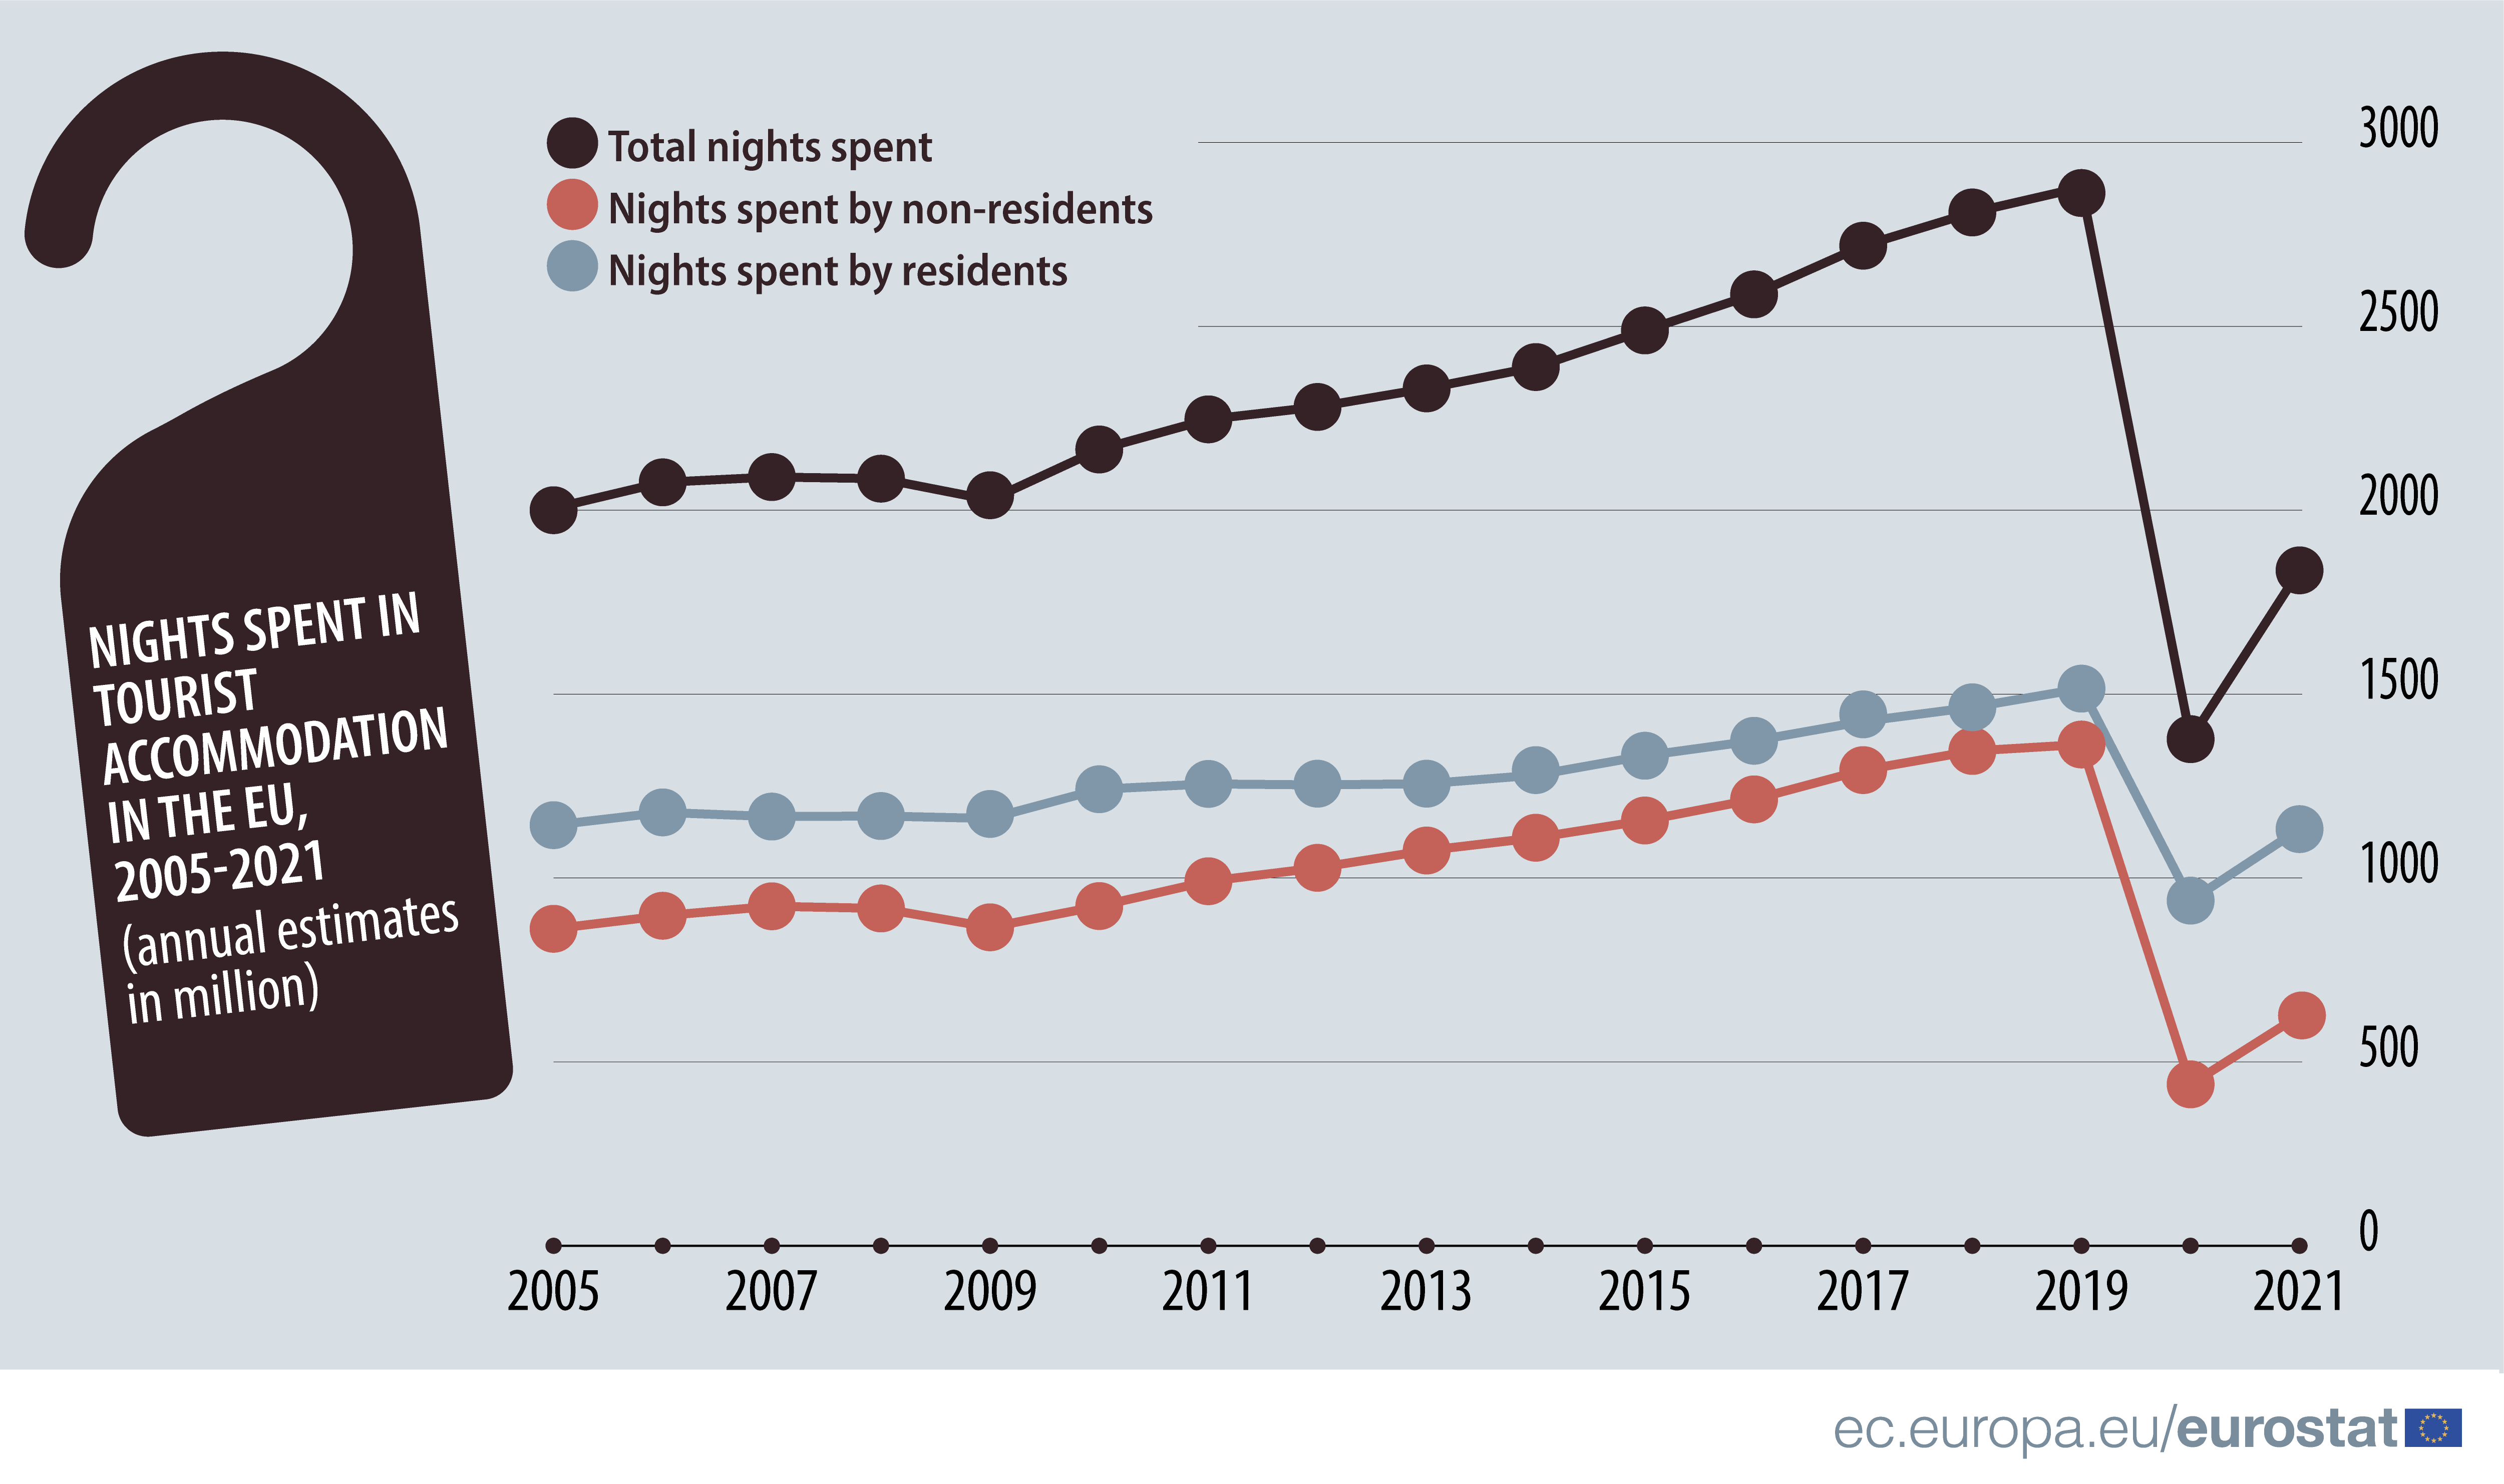 Line graph: Nights spent in tourist accommodation in the EU, 2005-2021, annual estimates in million, by total nights, nights spent by non-residents and nights spent by residents 